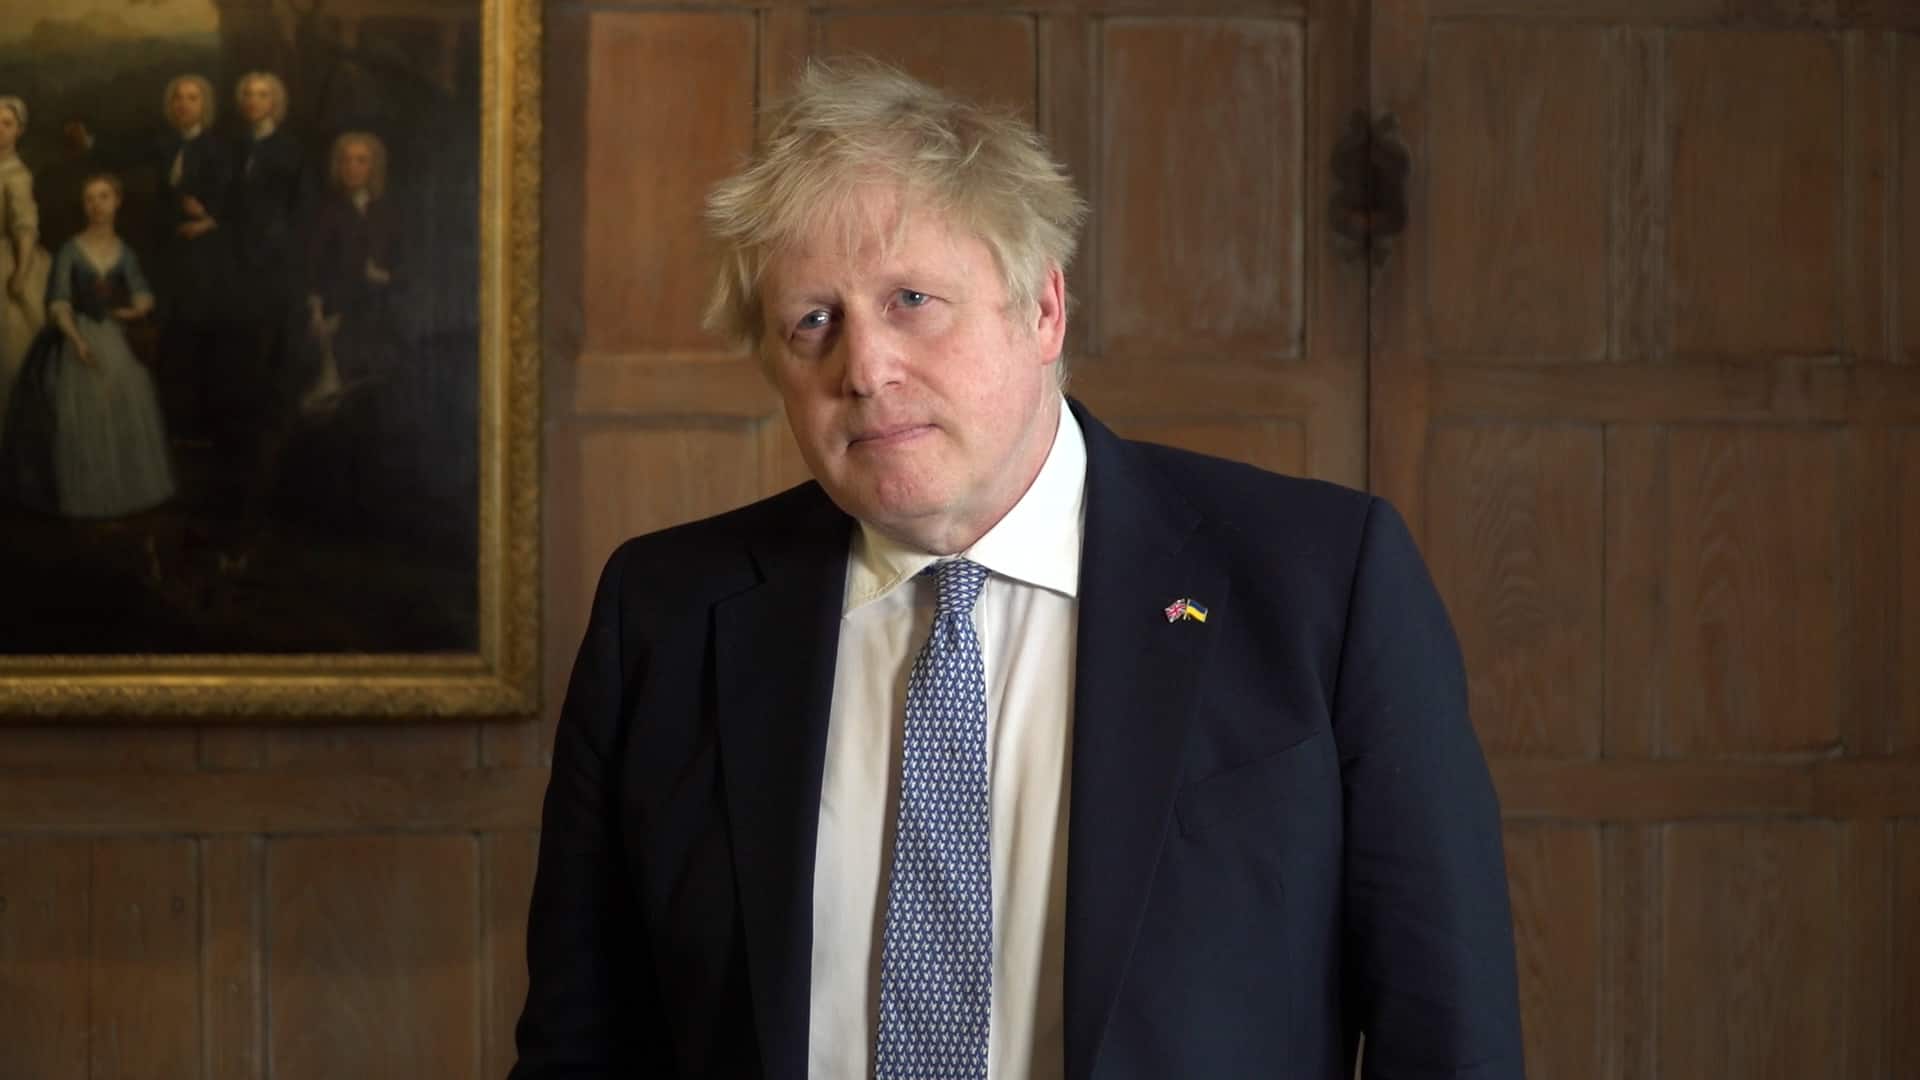 Watch: ‘Not worthy of office he holds’ – Tory MP demands Johnson quits